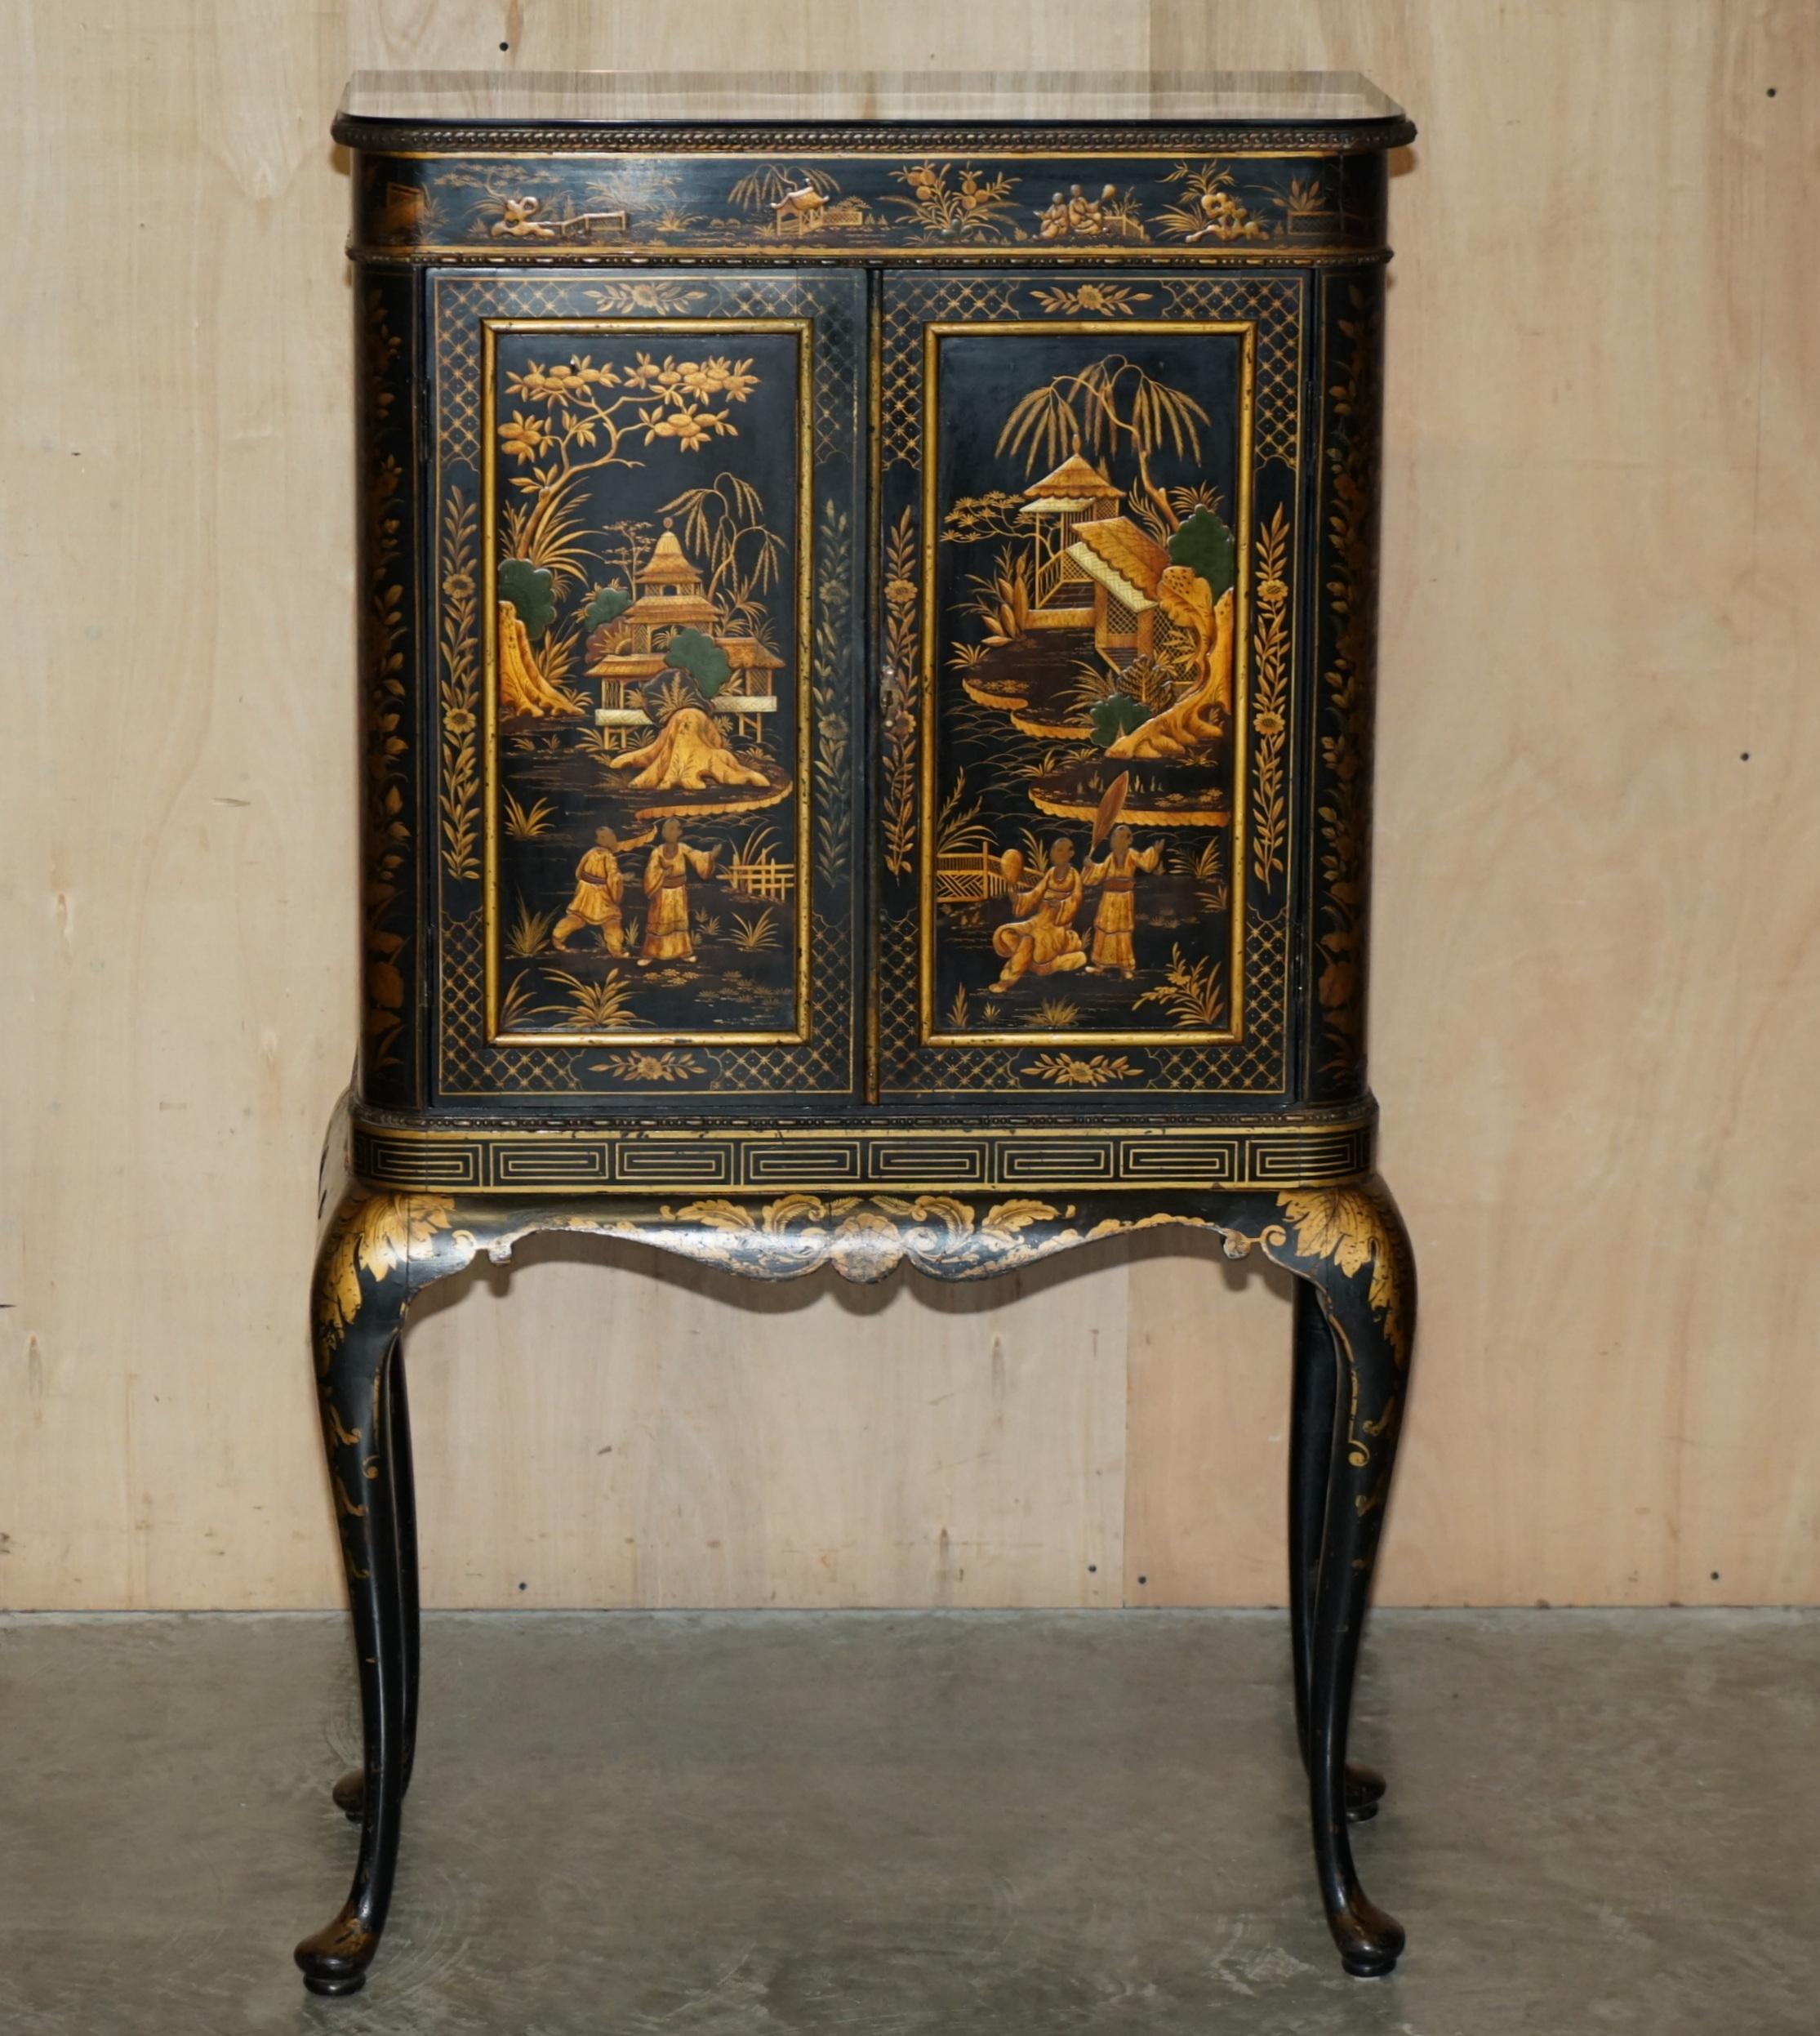 We are delighted to offer for sale this very fine circa 1920 Antique Chinese hand carved Chinoiserie drinks cabinet with mirrored doors

A very well made and good looking piece, ideally suited as a drinks cabinet, it currently doesn't have shelves